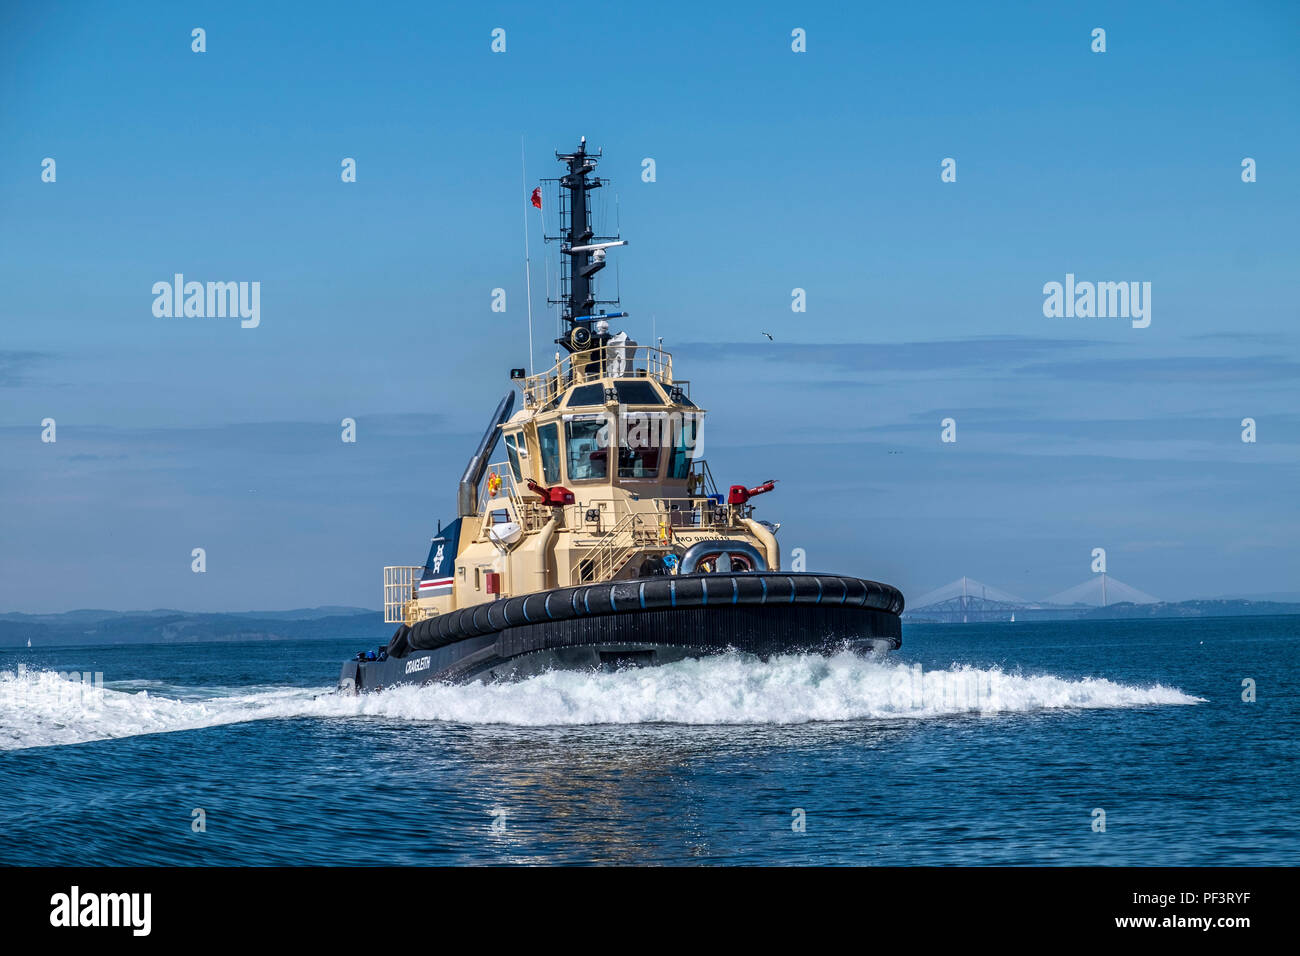 Tug Boat on River Forth Stock Photo